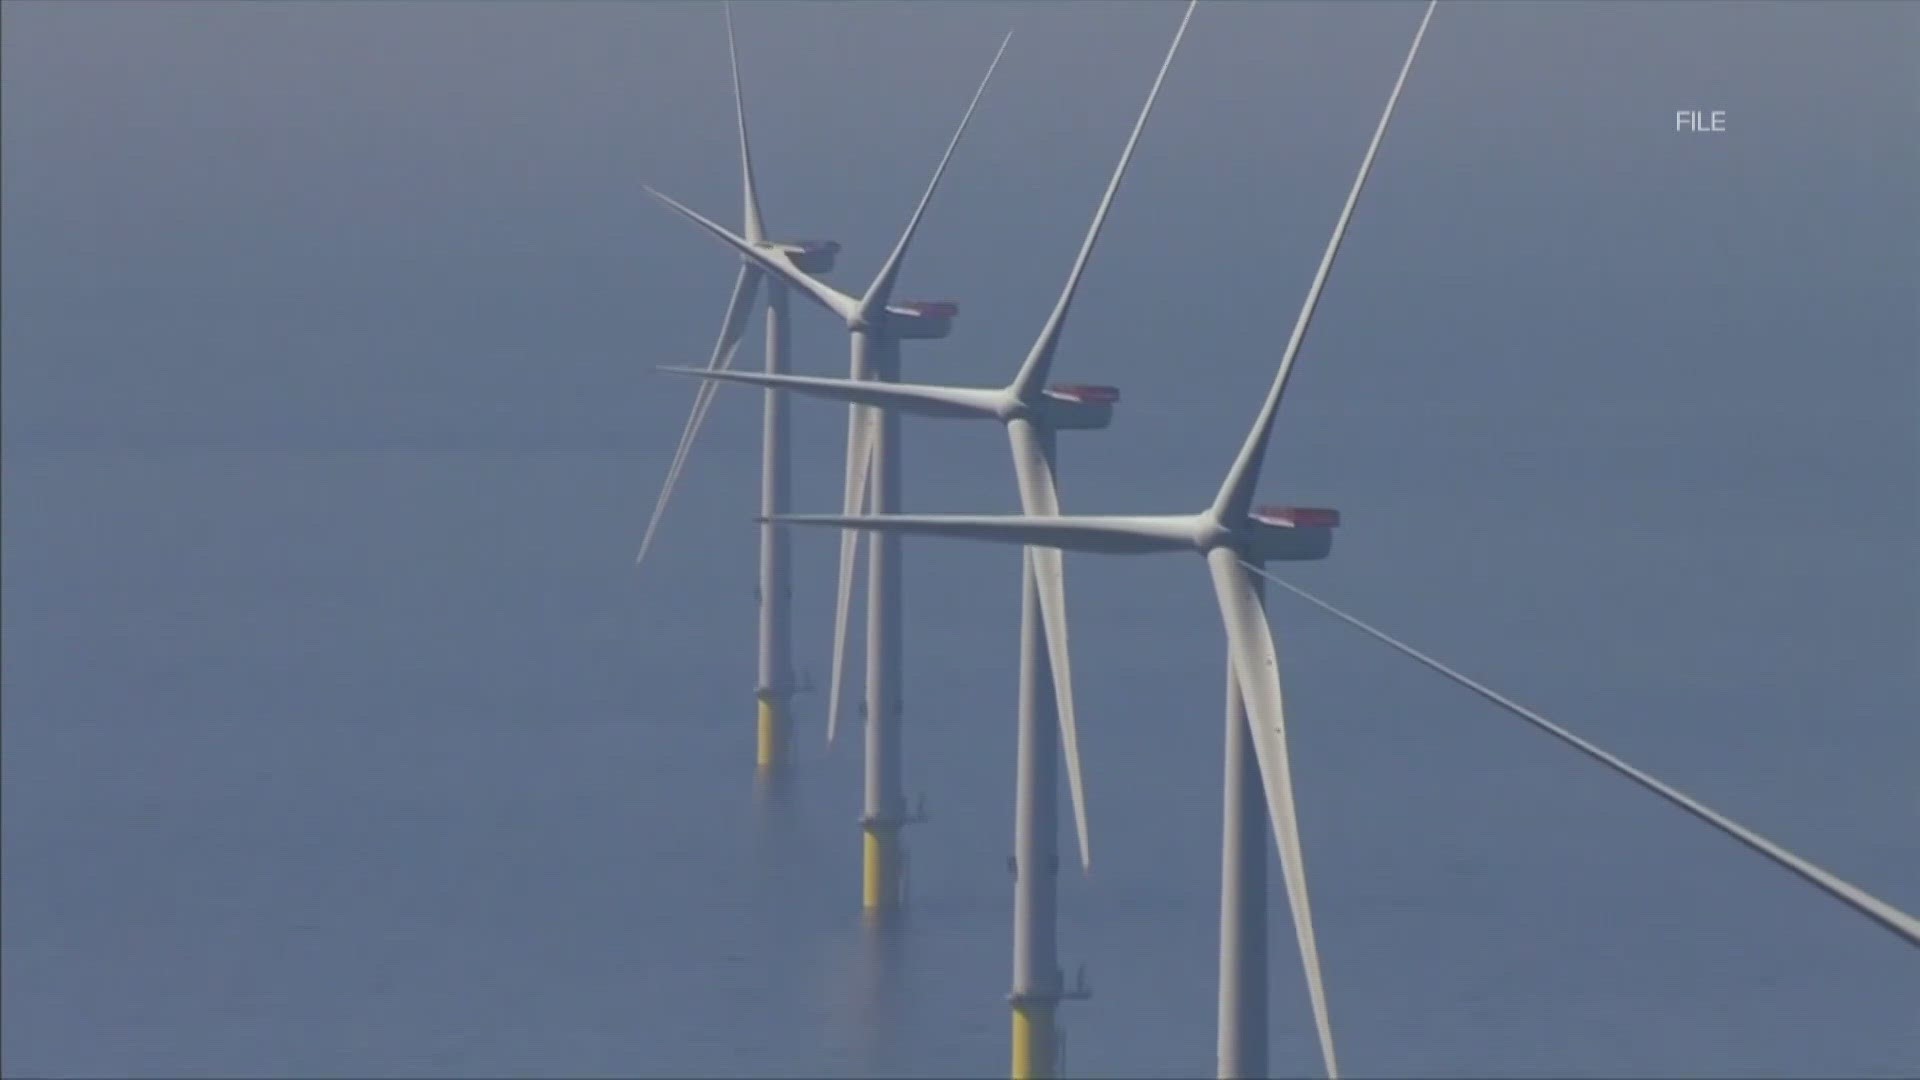 The Maine Legislature's energy Commitee heard testimony Thursday on a pair of competing bills about the future of wind power energy in Maine.